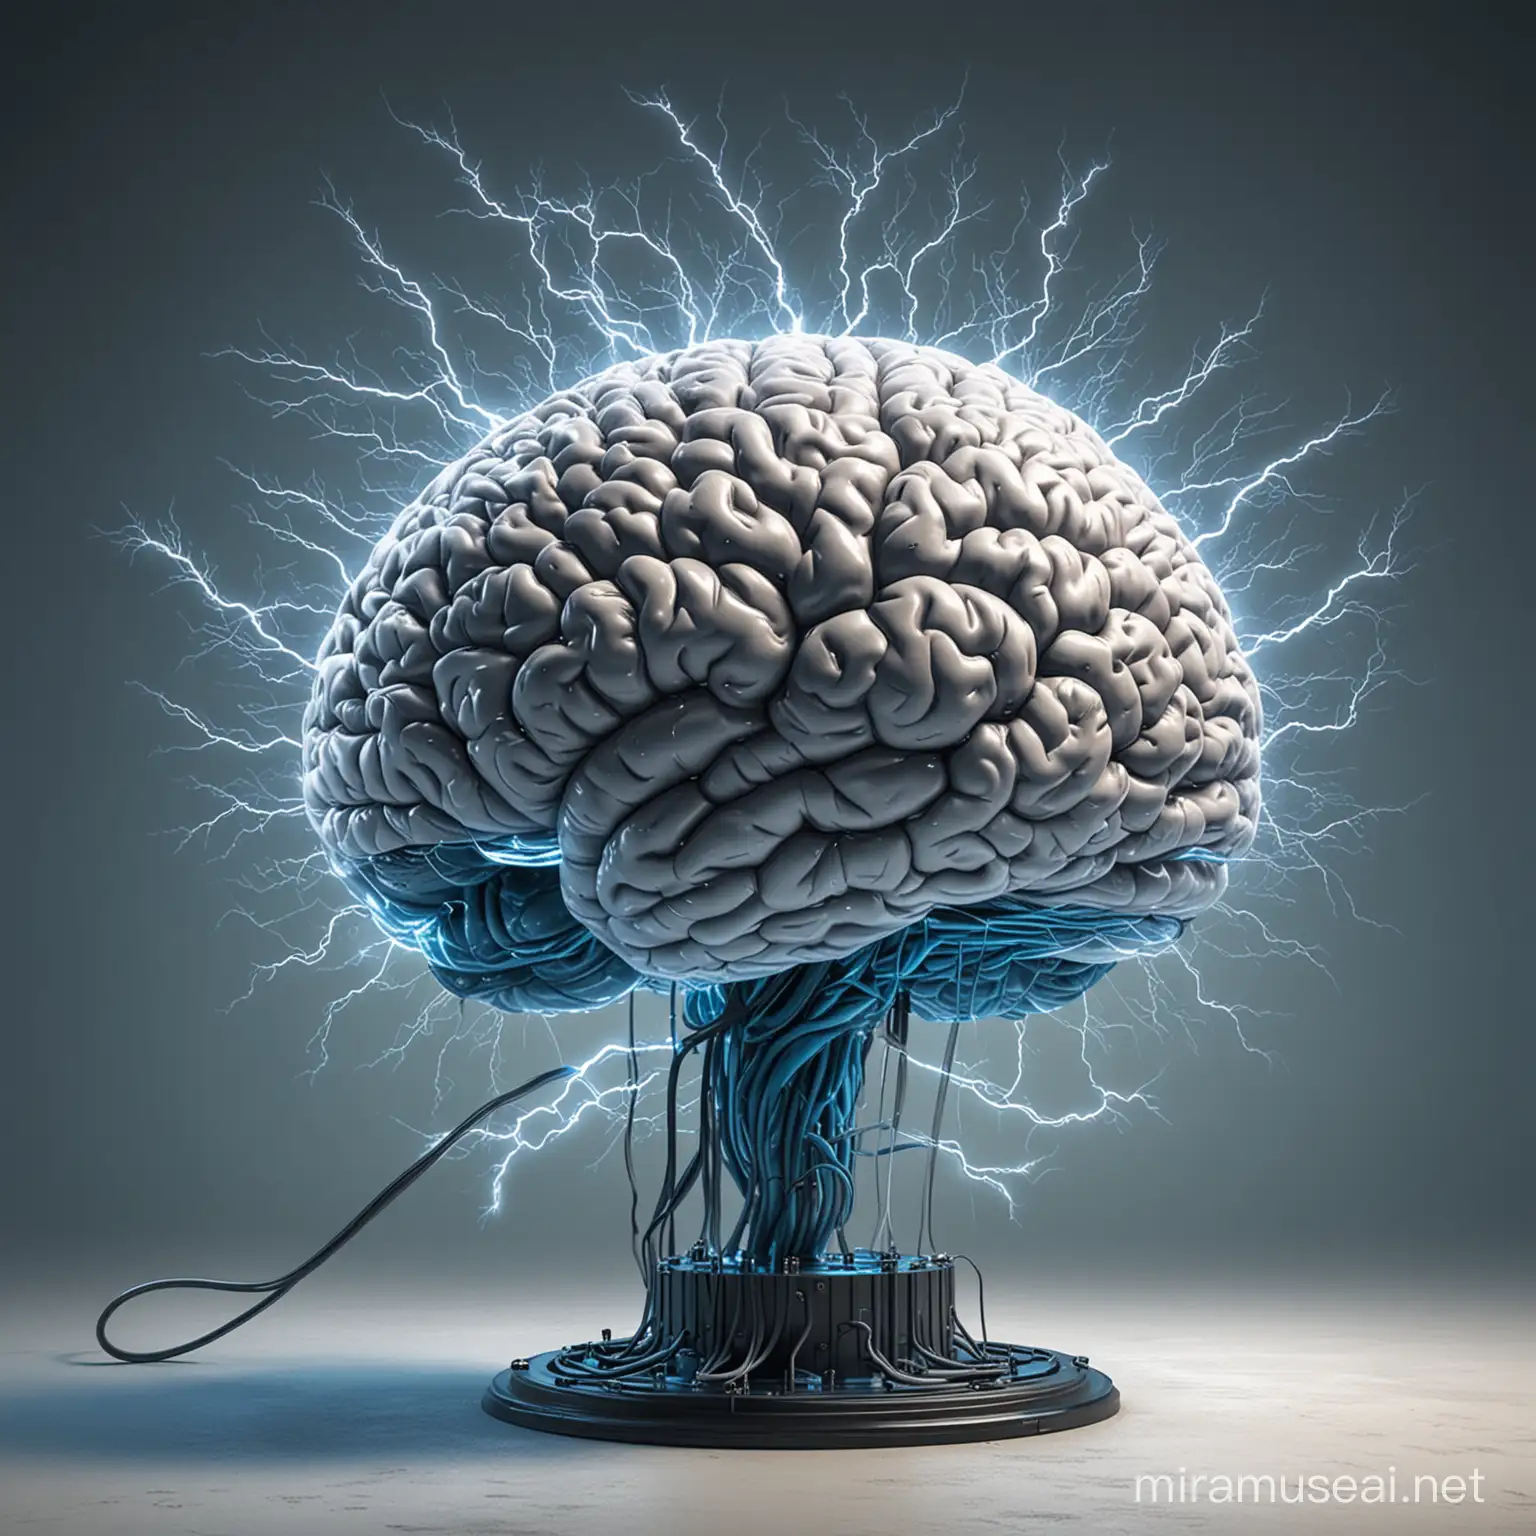 Giant Brain supercharged with electricity hovering in a huge empty, and use electric-blue as the base color for the image.